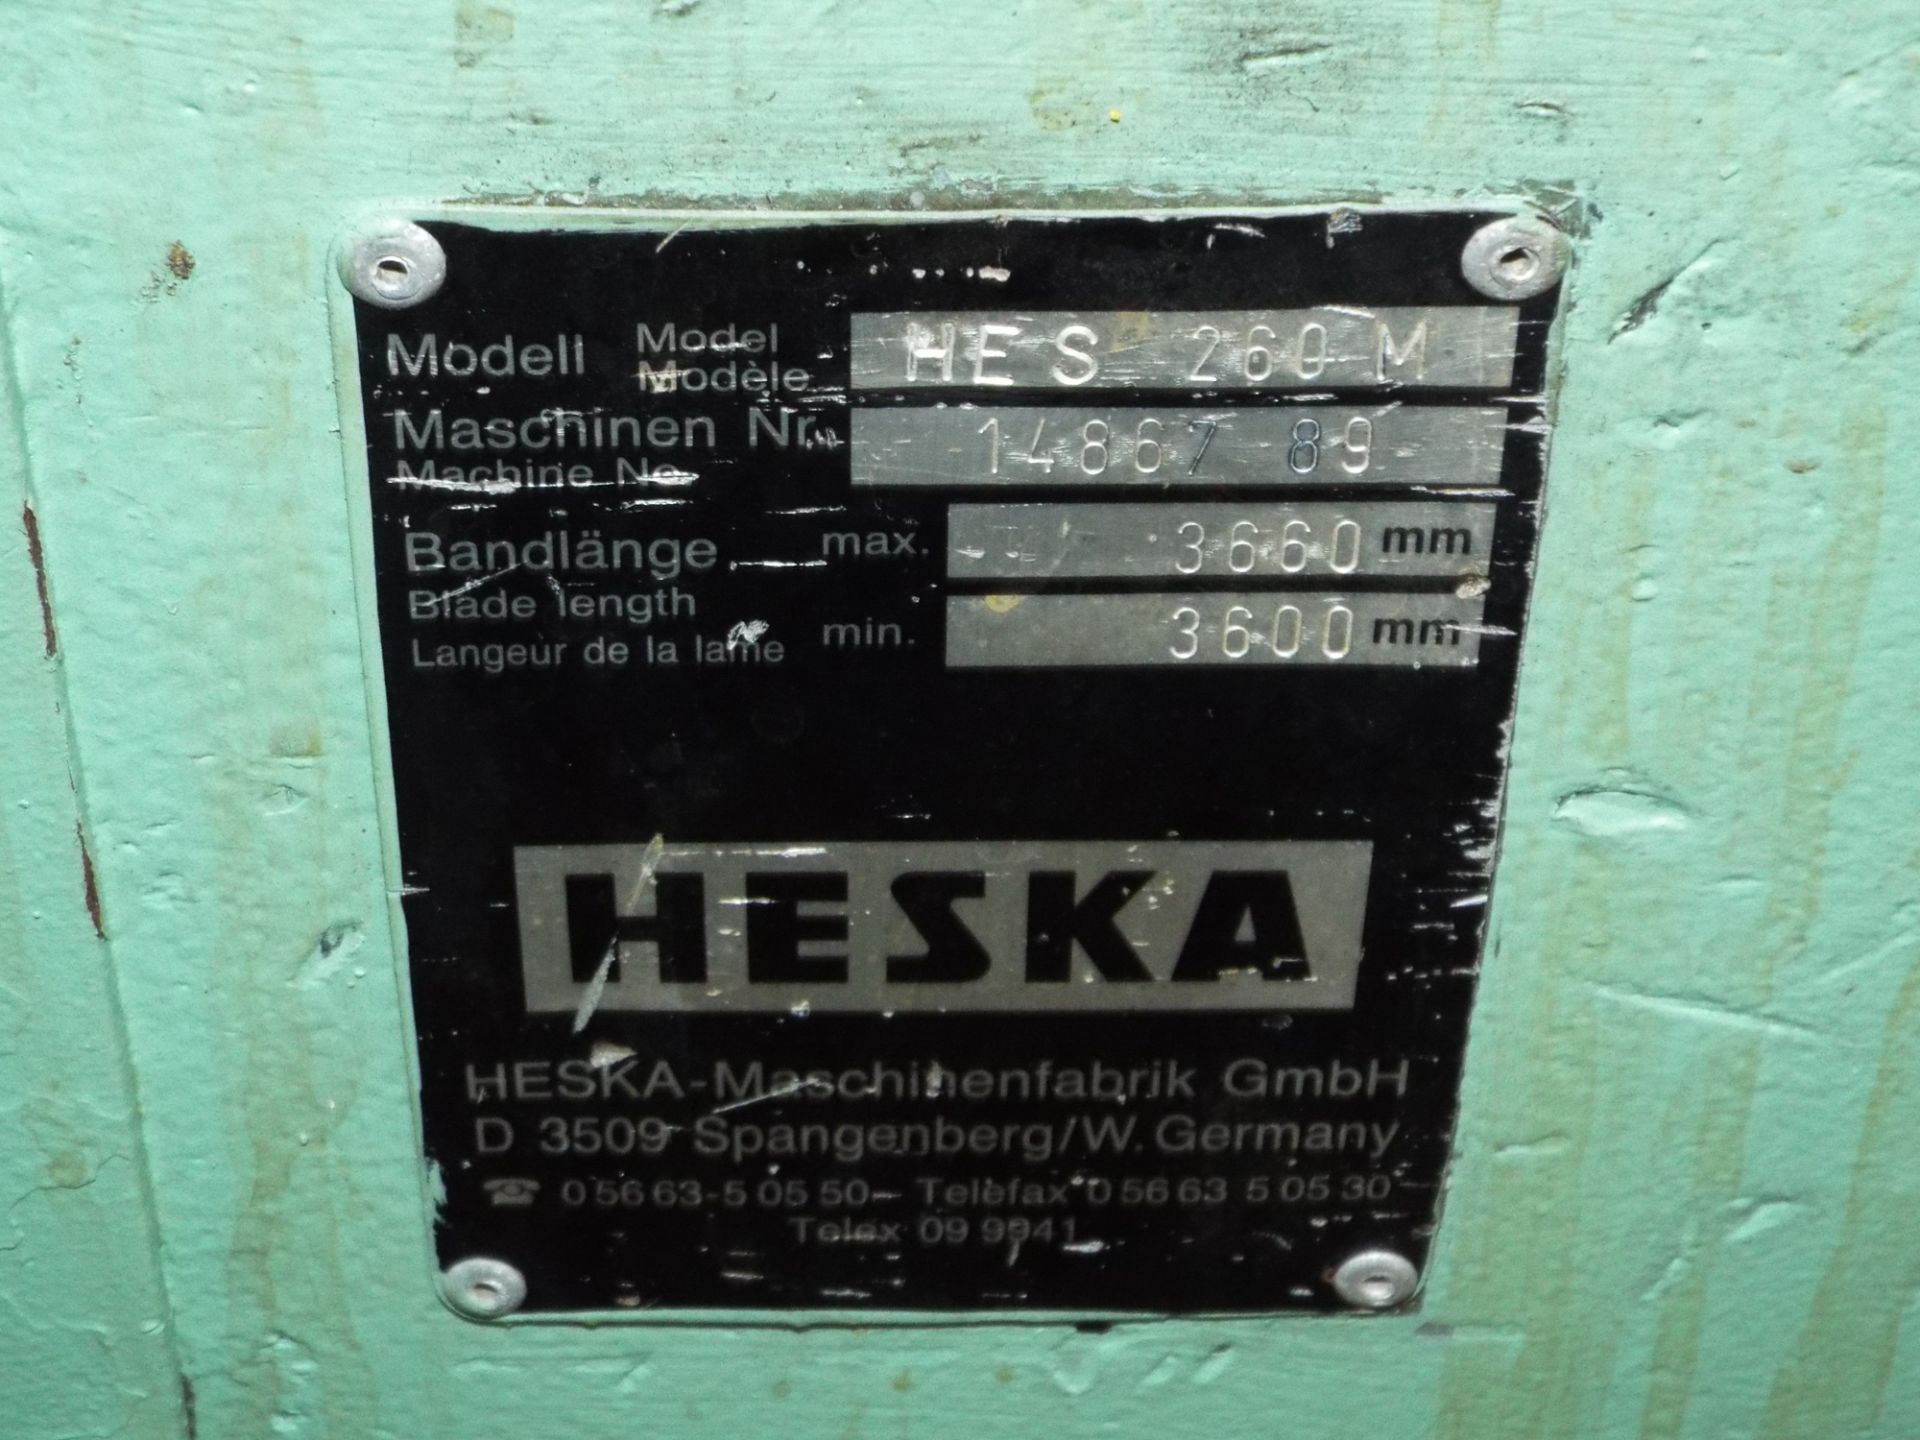 HESKA HES 260M HORIZONTAL METAL CUTTING BAND SAW WITH 10"X20" CAPACITY, S/N: 14867-89 [RIGGING FEE - Image 3 of 3